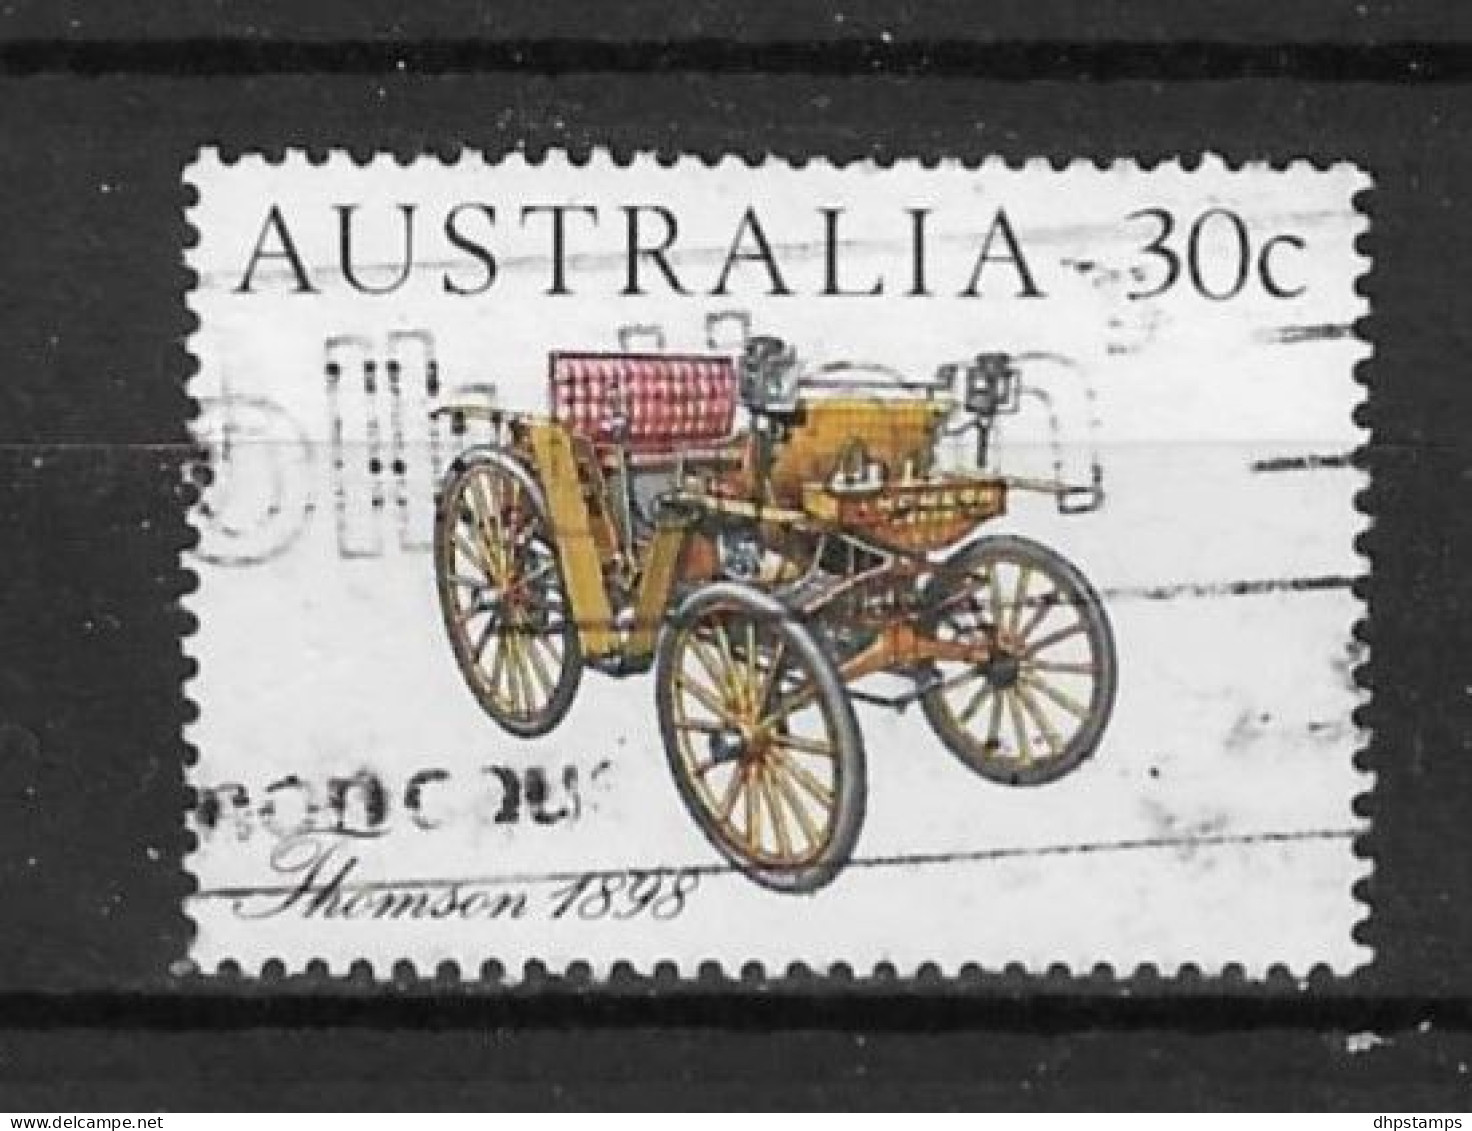 Australia 1984 Classic Cars Y.T. 850 (0) - Used Stamps